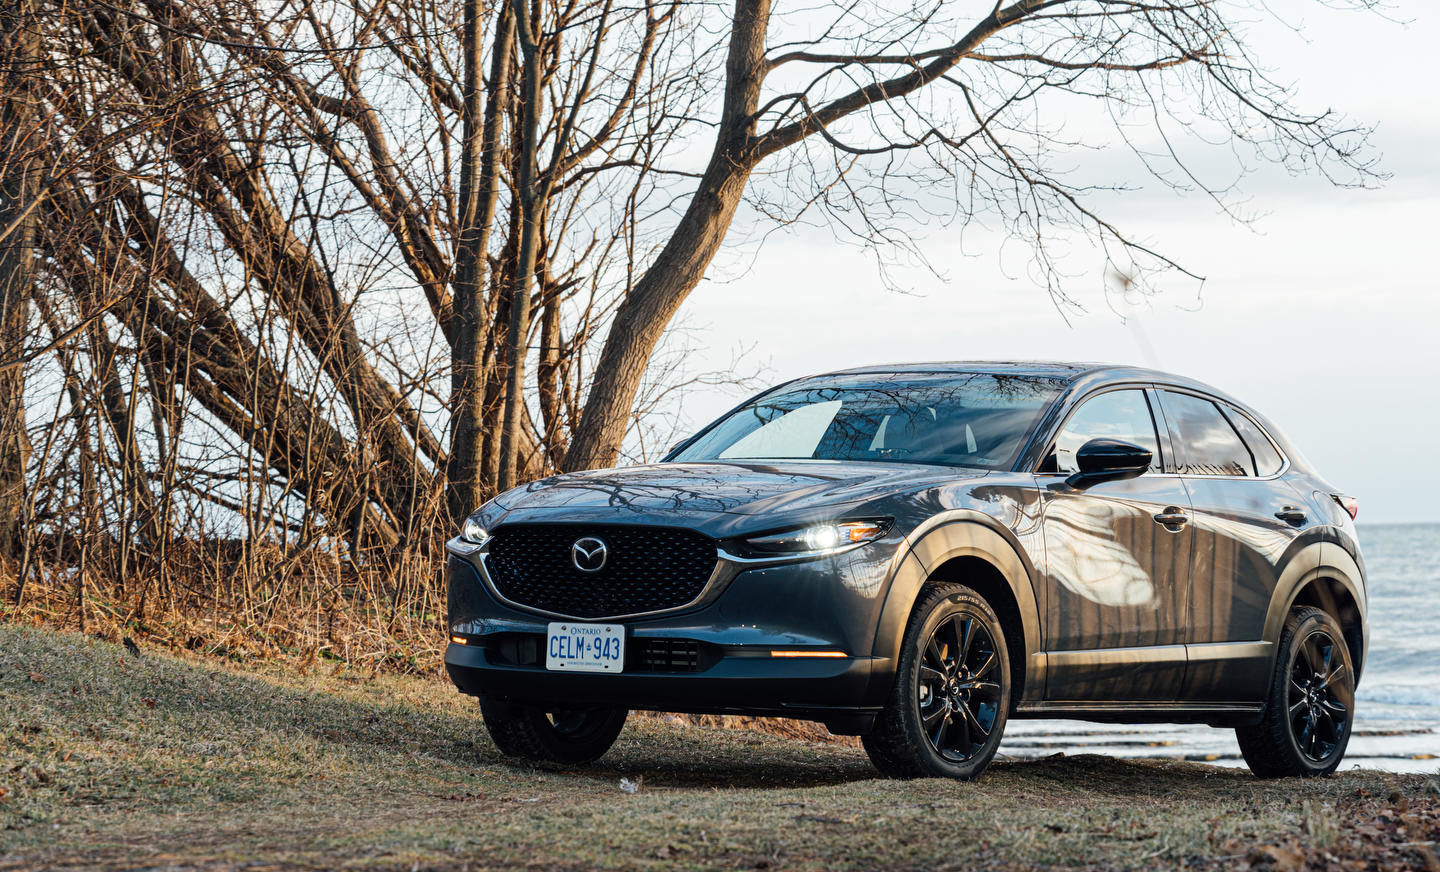 2022 Mazda CX-30 gets improved features